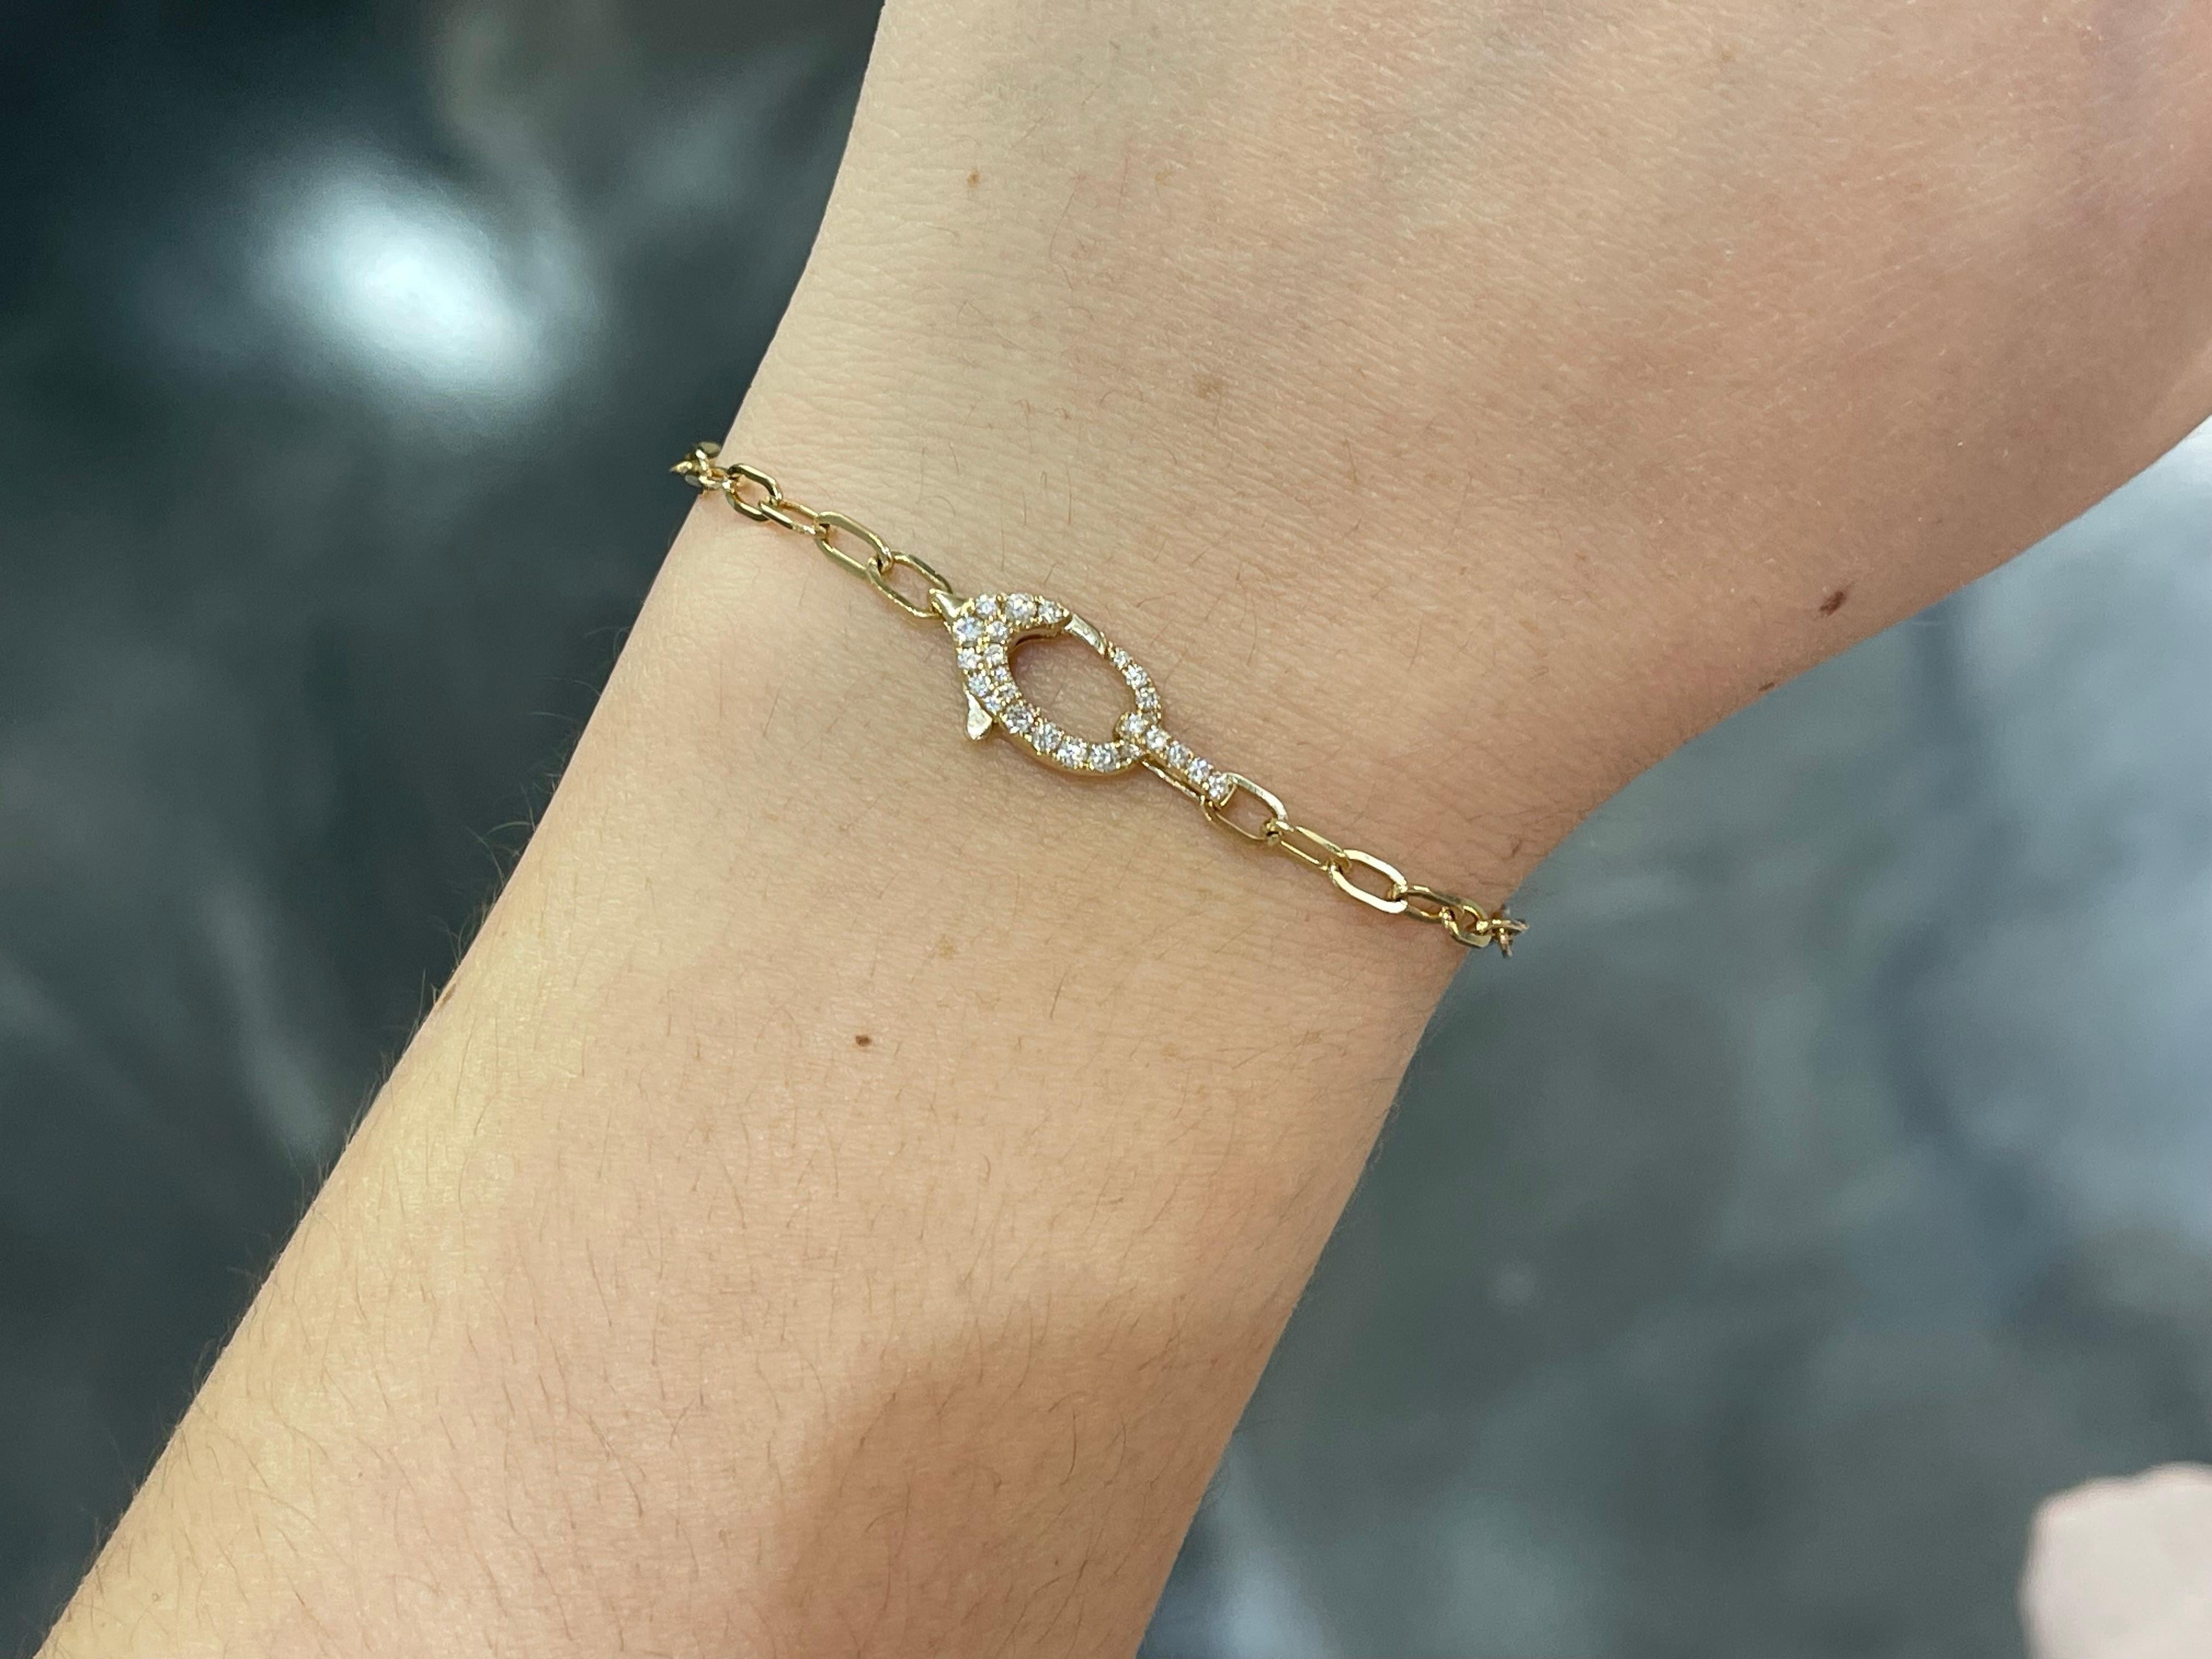 14k yellow gold paperclip bracelet with .24 CTW diamond clasp. The diamonds in this bracelet are all round, the bracelet measures to be 7 1/4 inches long, the clasp measures to be 14.5mm x 7.5mm, and it has a total weight of 3.6 grams. 